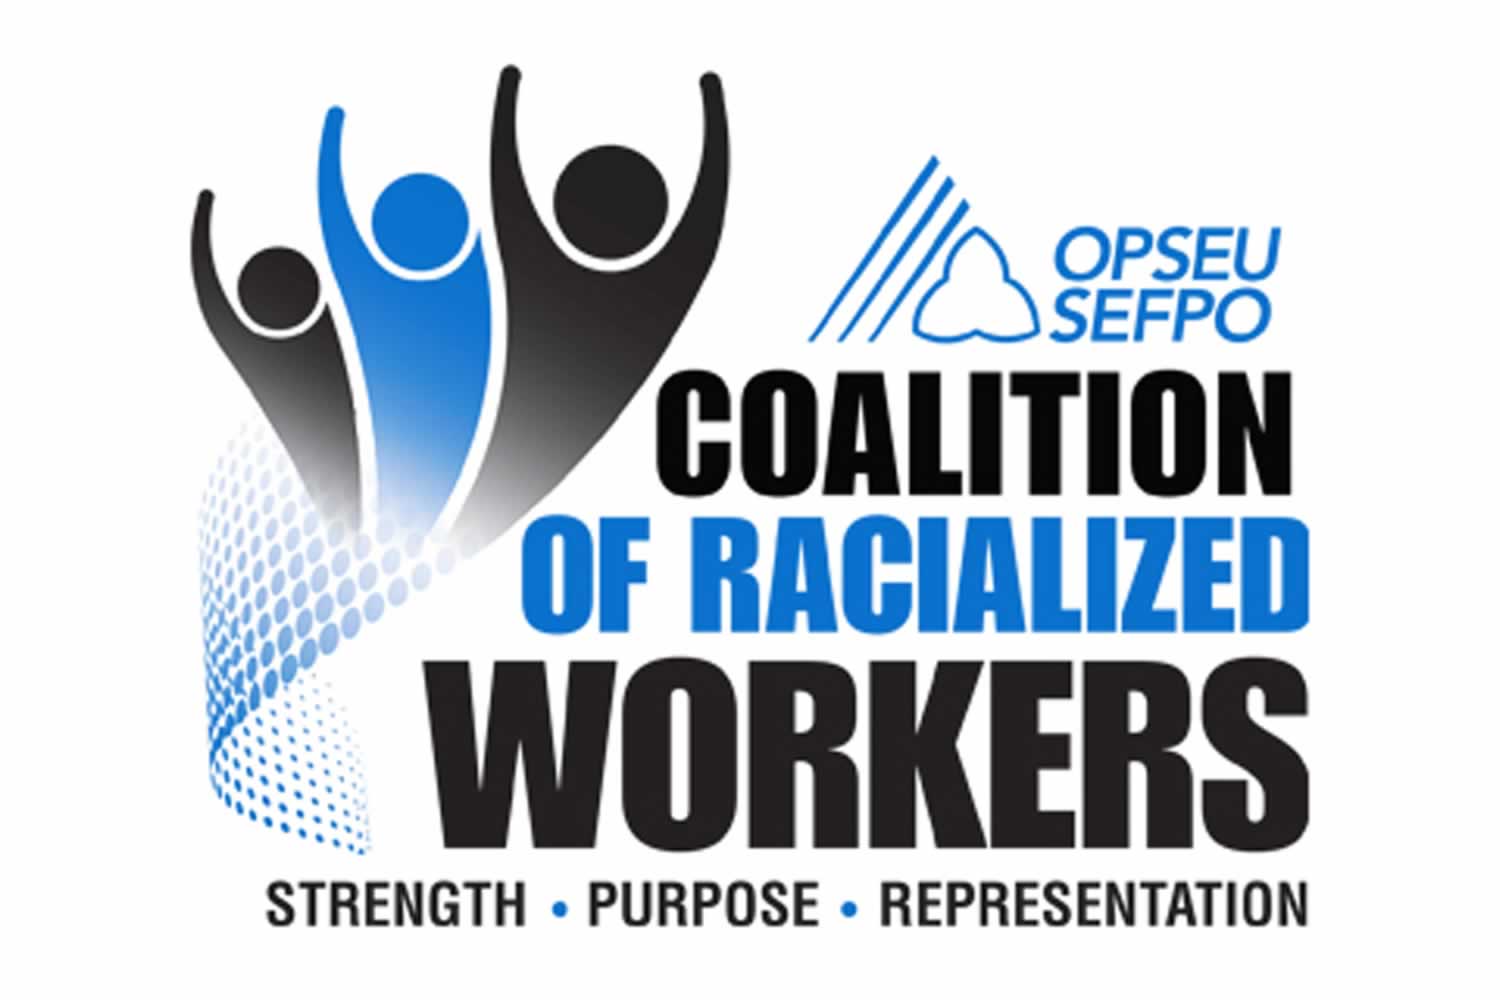 Coalition of Racialized Workers logo: strength, purpose, representation